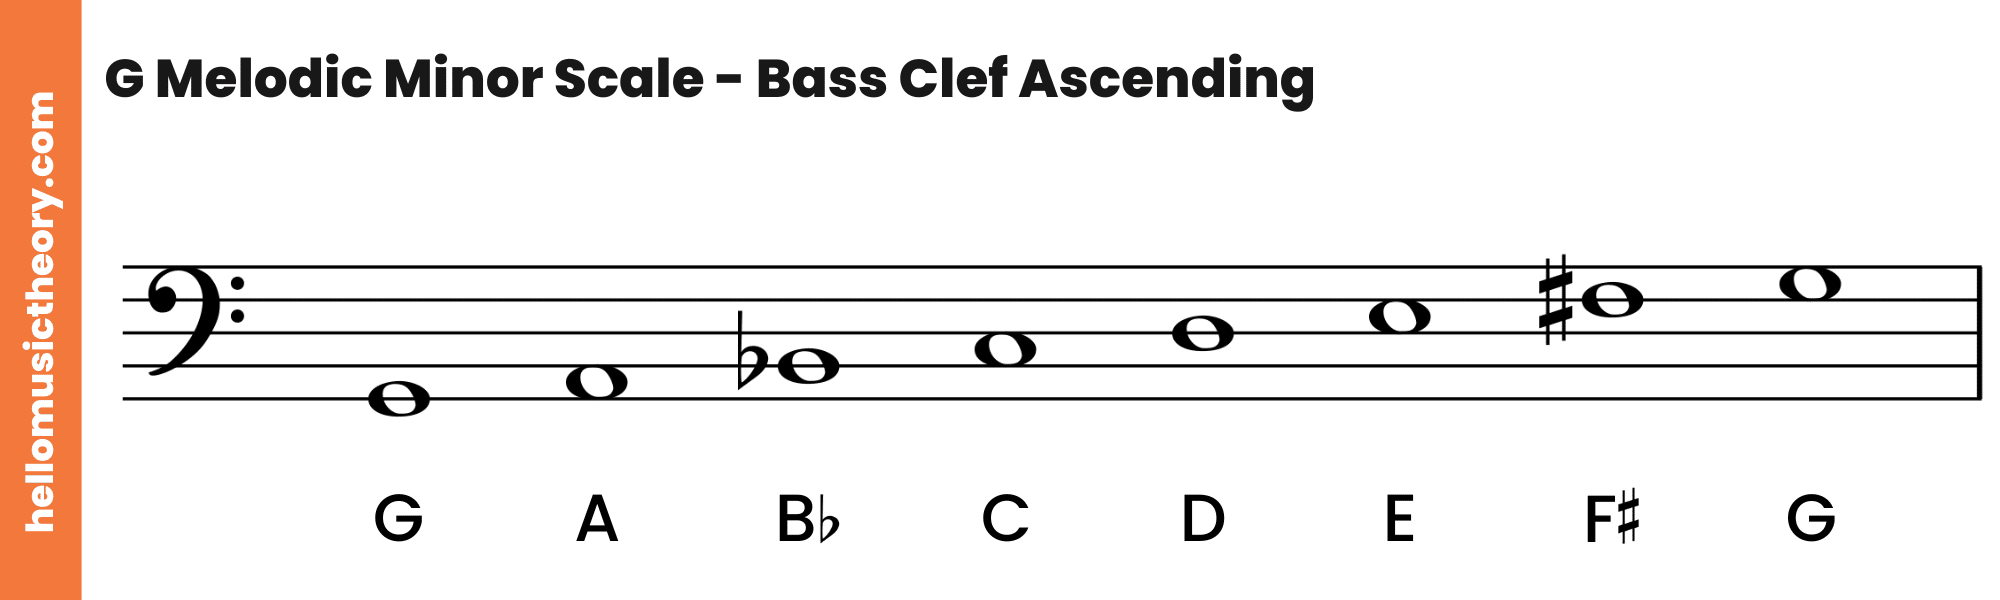 G Melodic Minor Scale Bass Clef Ascending